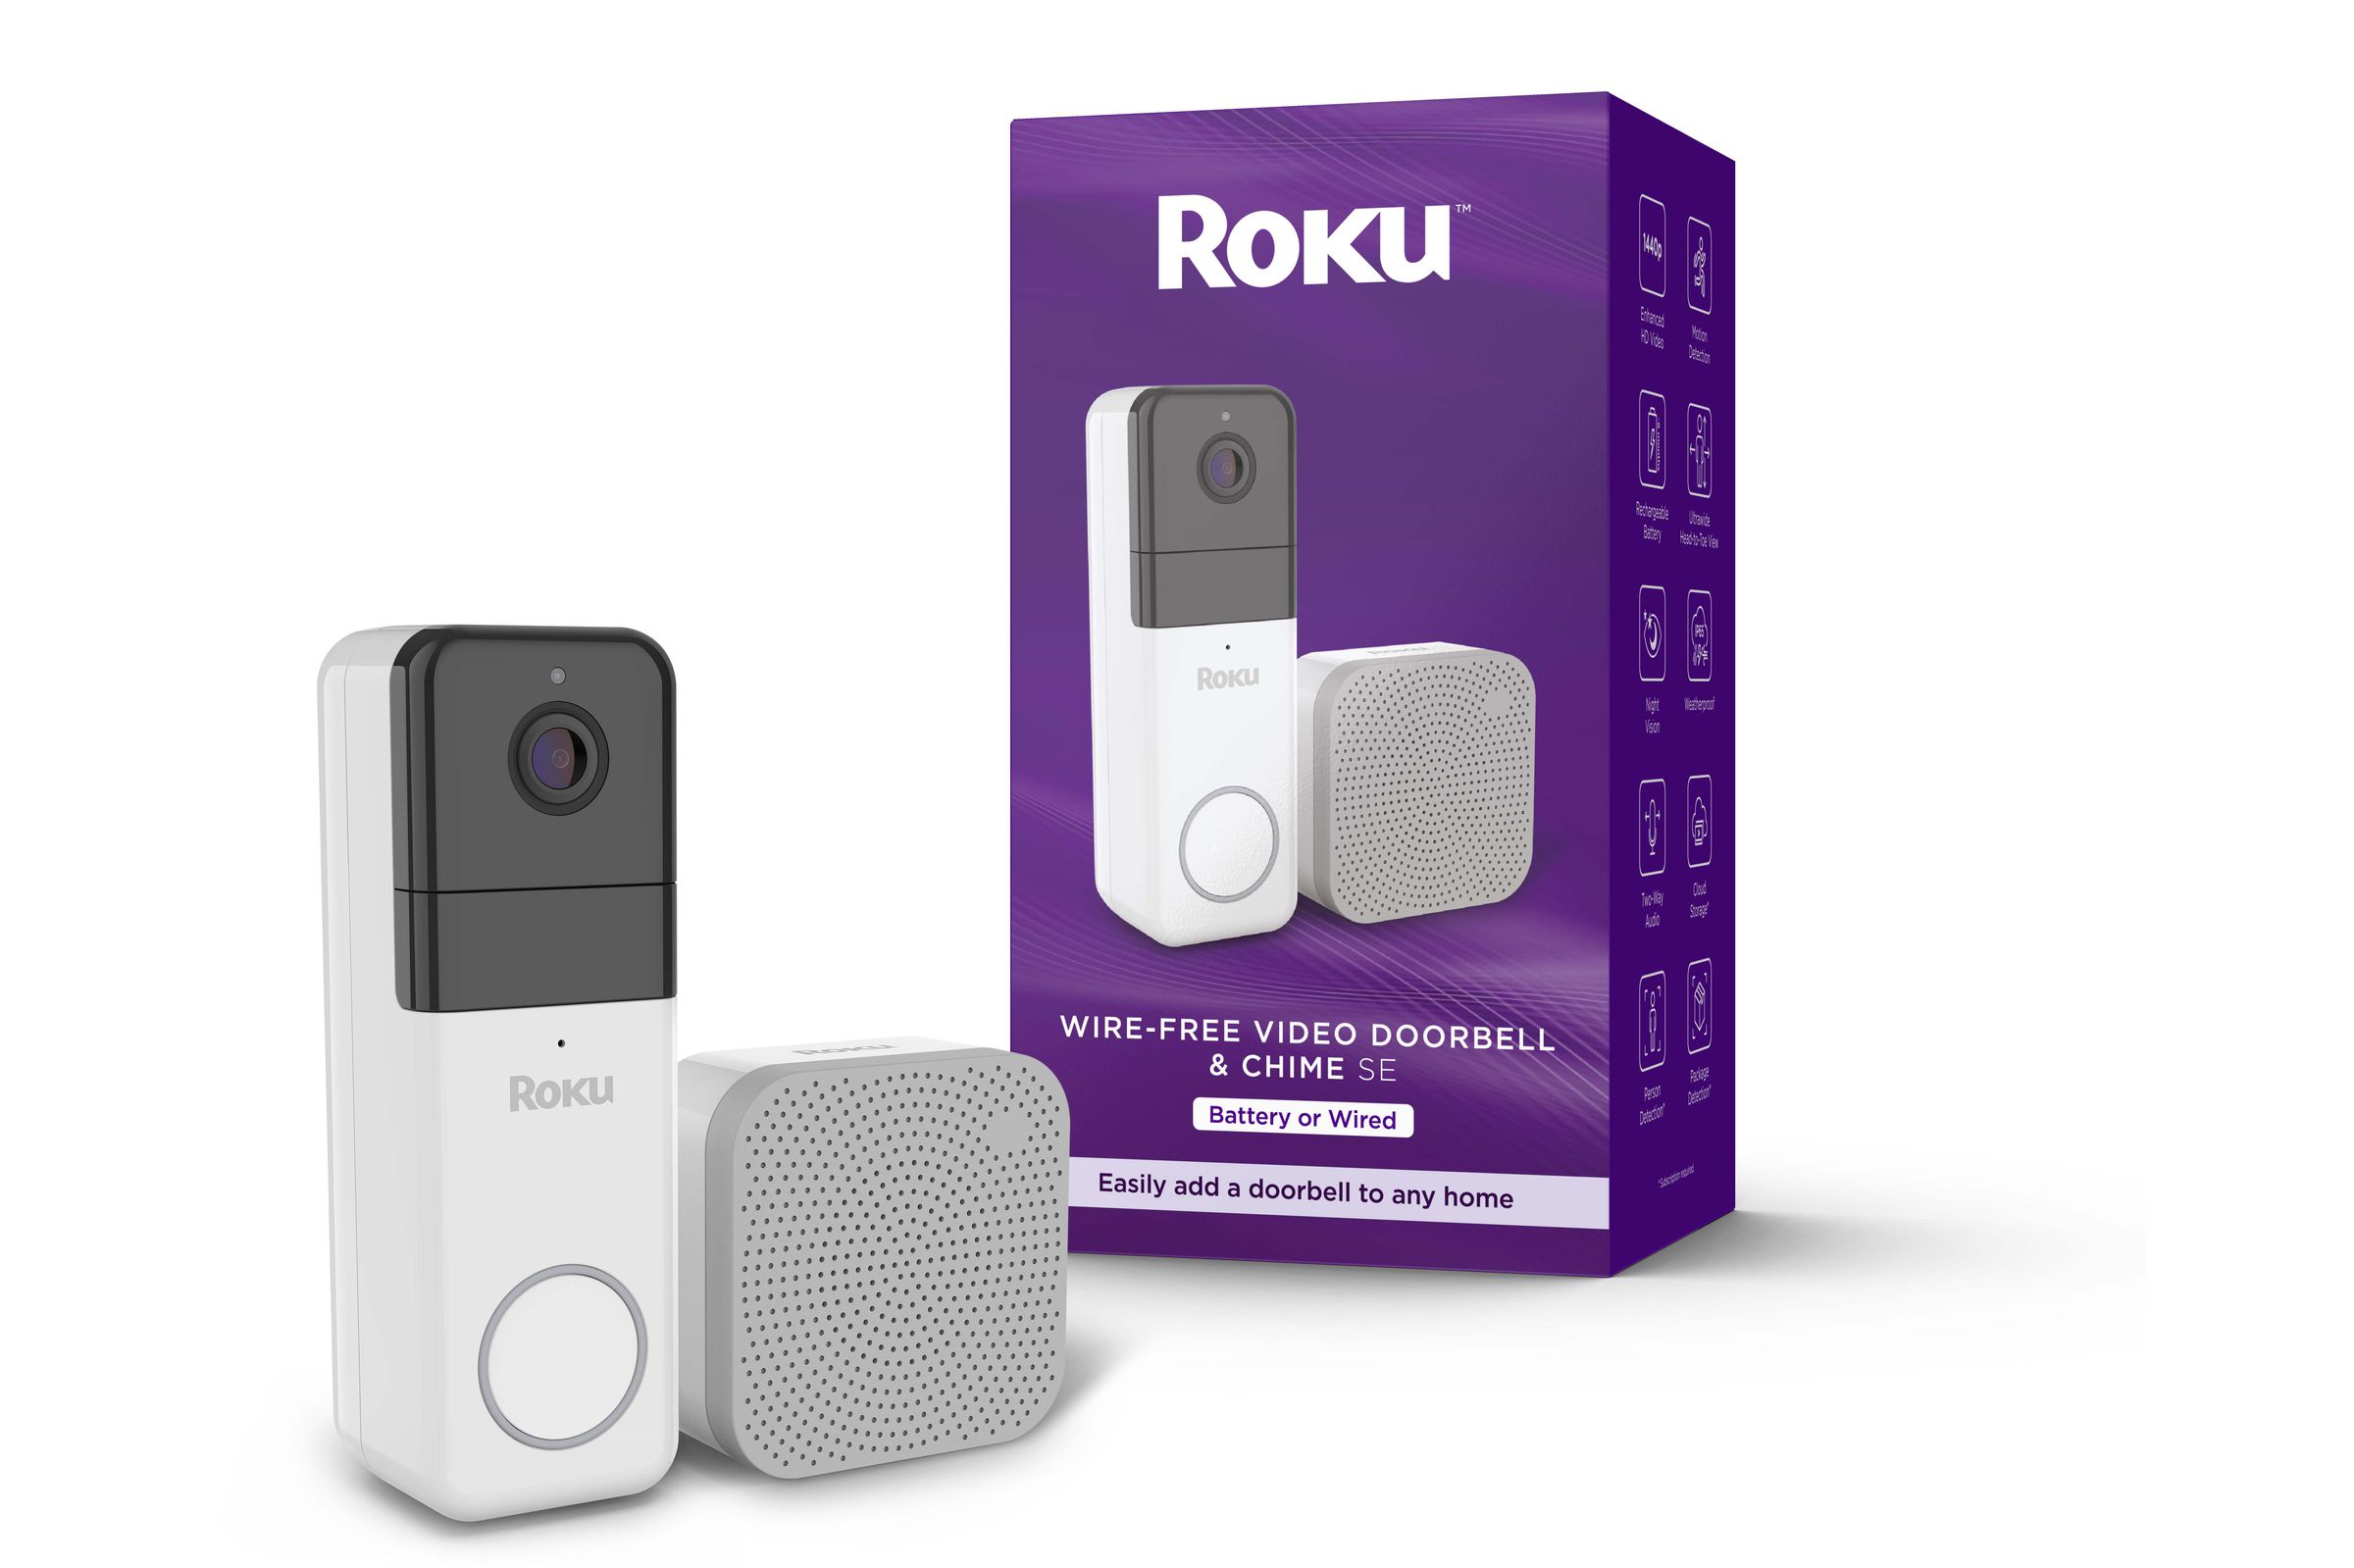 Roku Wire-Free Video Doorbell and Chime.